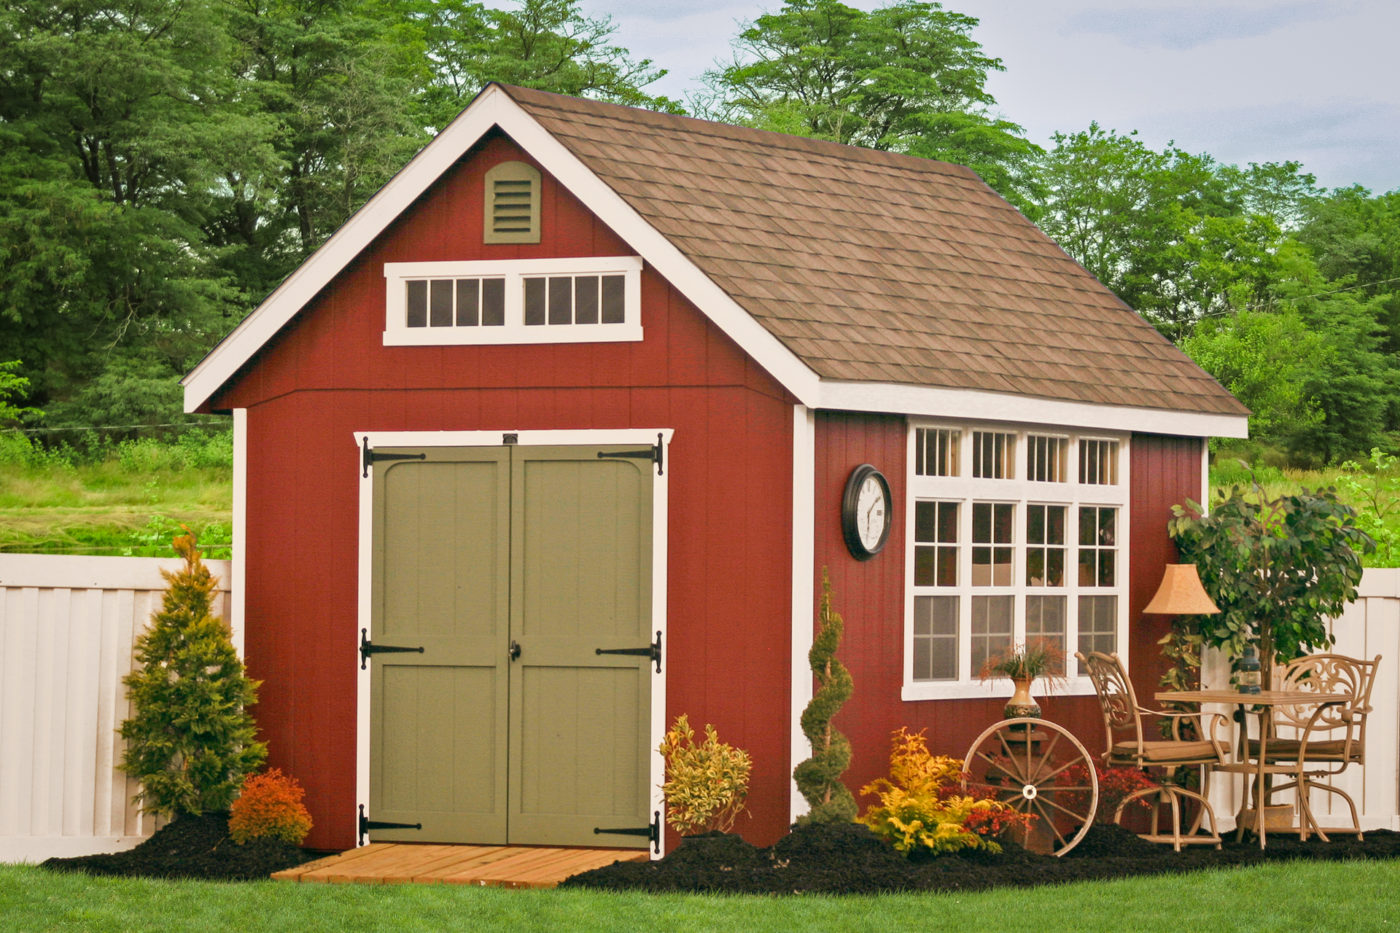 A Premier shed from Sheds Unlimited